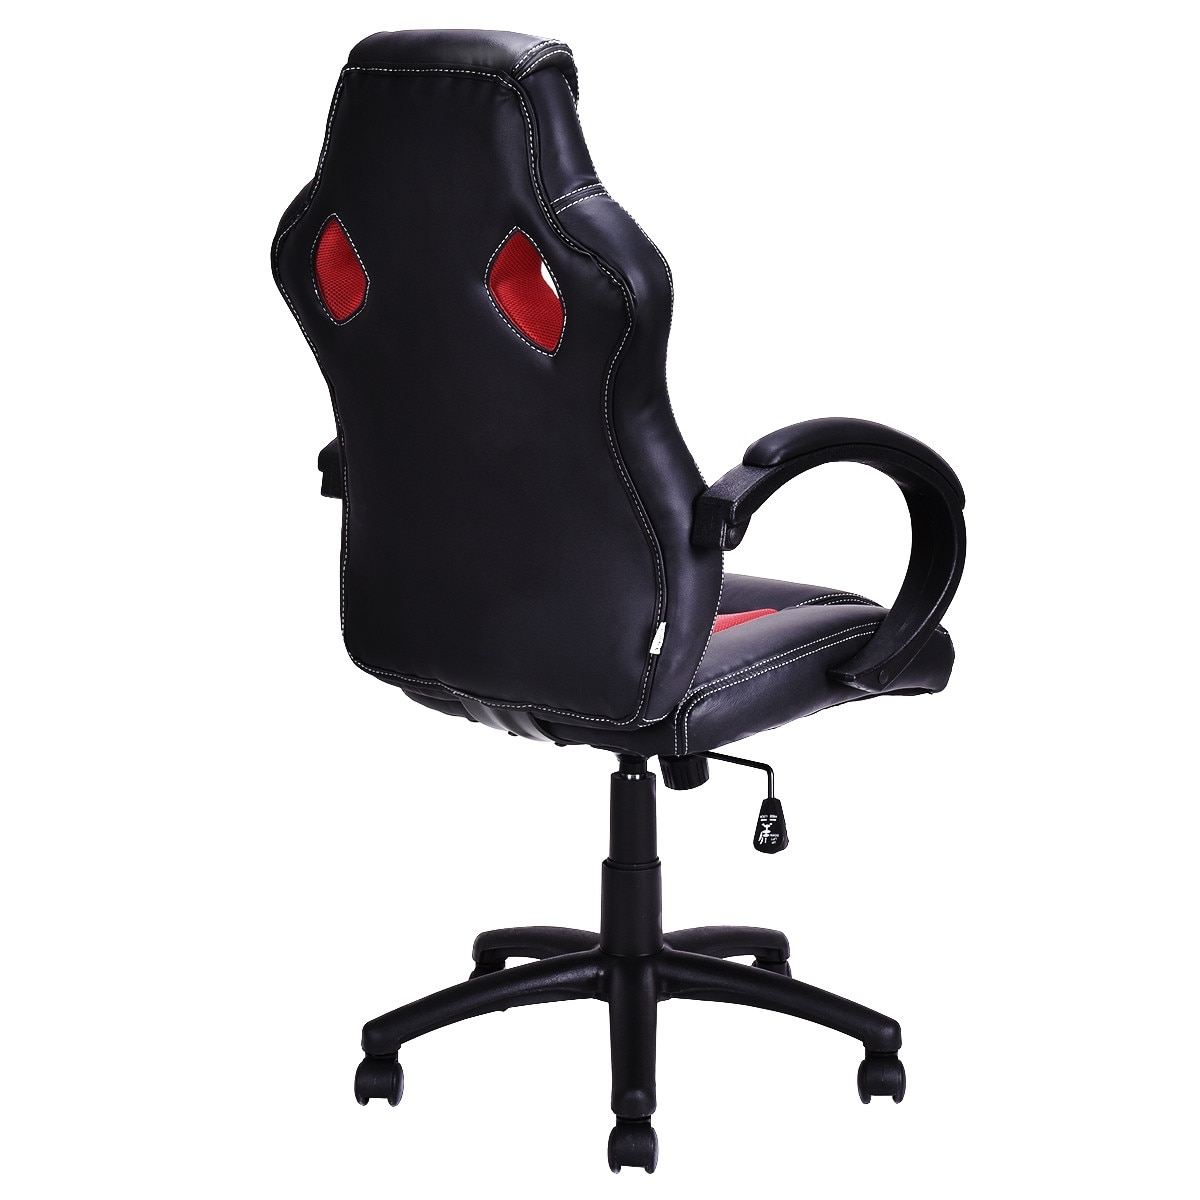 https://ak1.ostkcdn.com/images/products/is/images/direct/86c50fd7bfe957671028c6d78a15dd55cf2447ef/High-Back-Race-Car-Style-Bucket-Seat-Office-Desk-Chair-Gaming-Chair-New-red.jpg